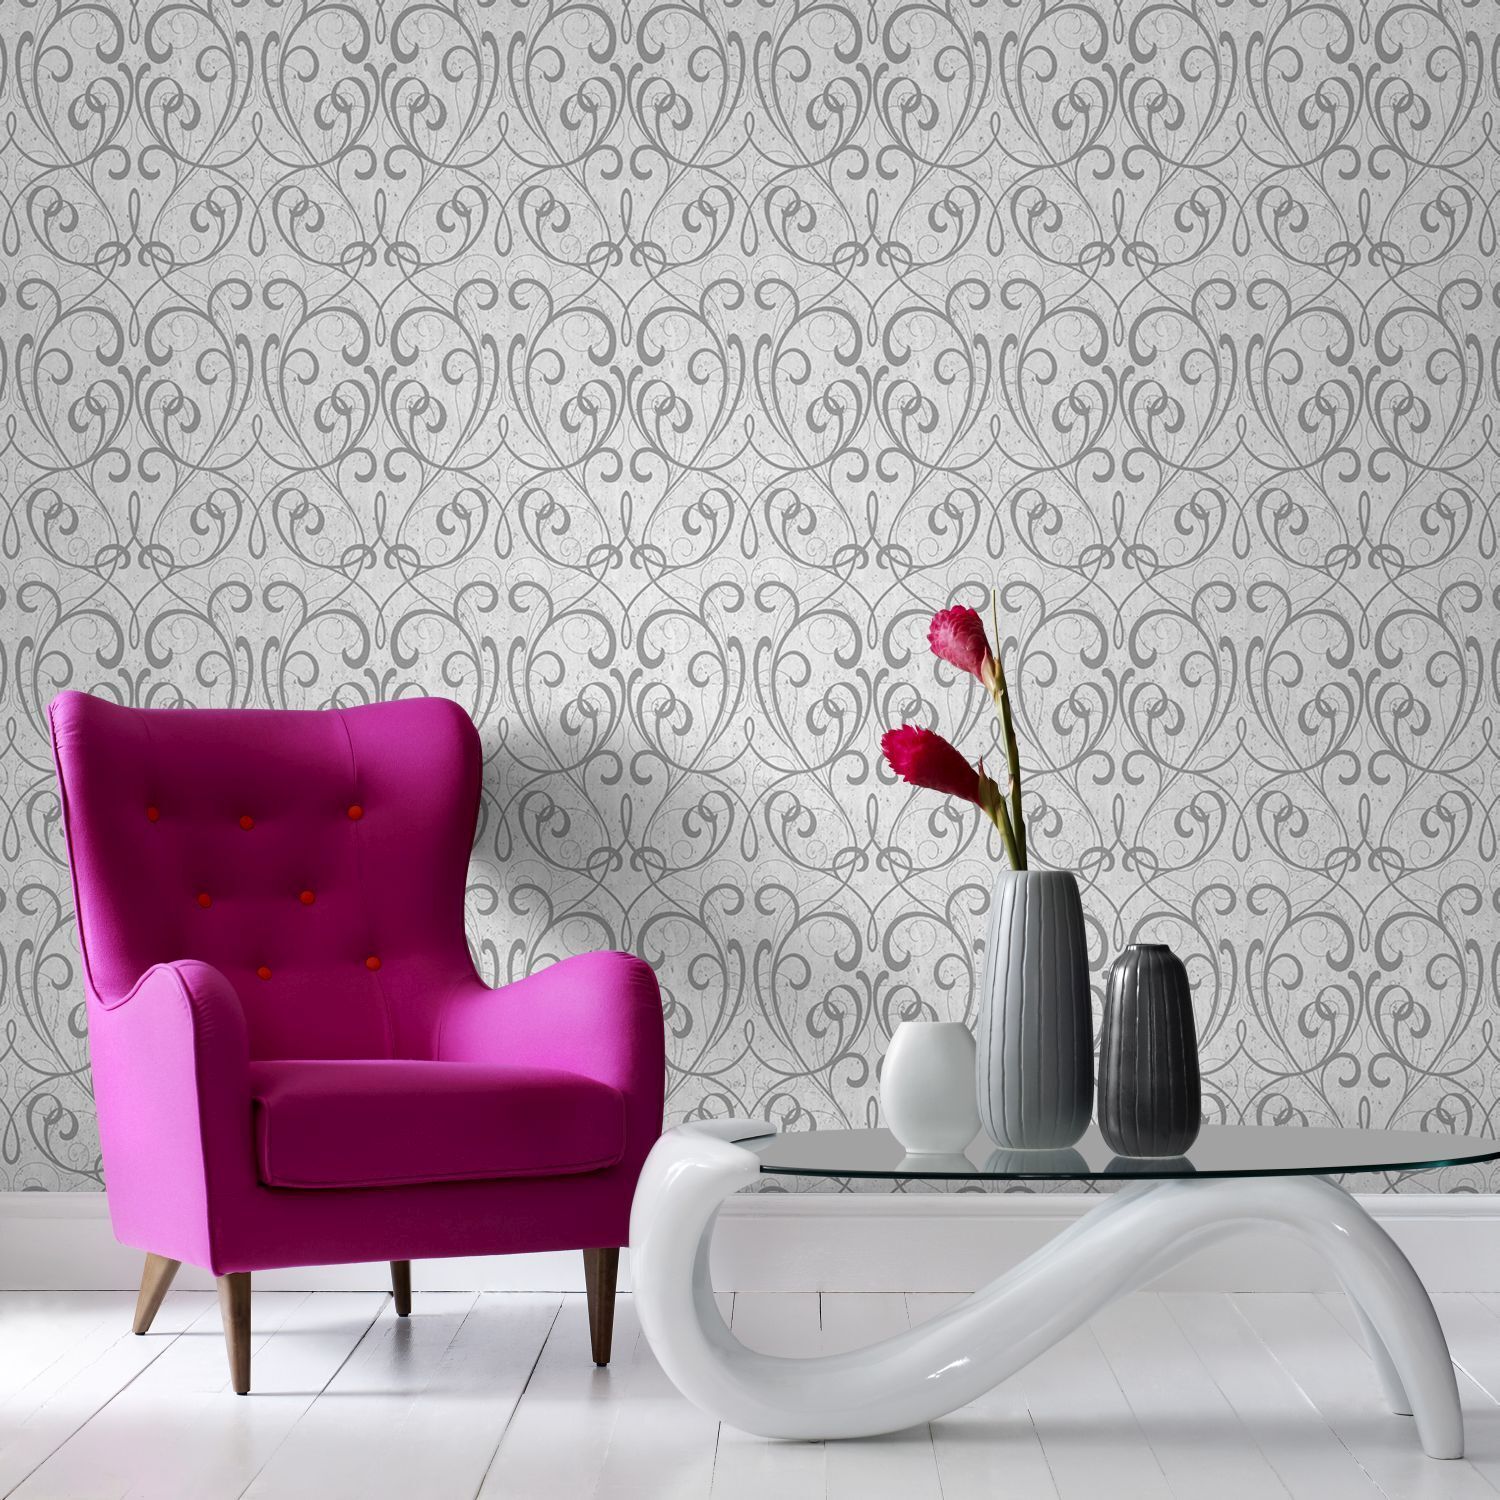 silver and white wallpaper uk,wallpaper,wall,pink,furniture,purple